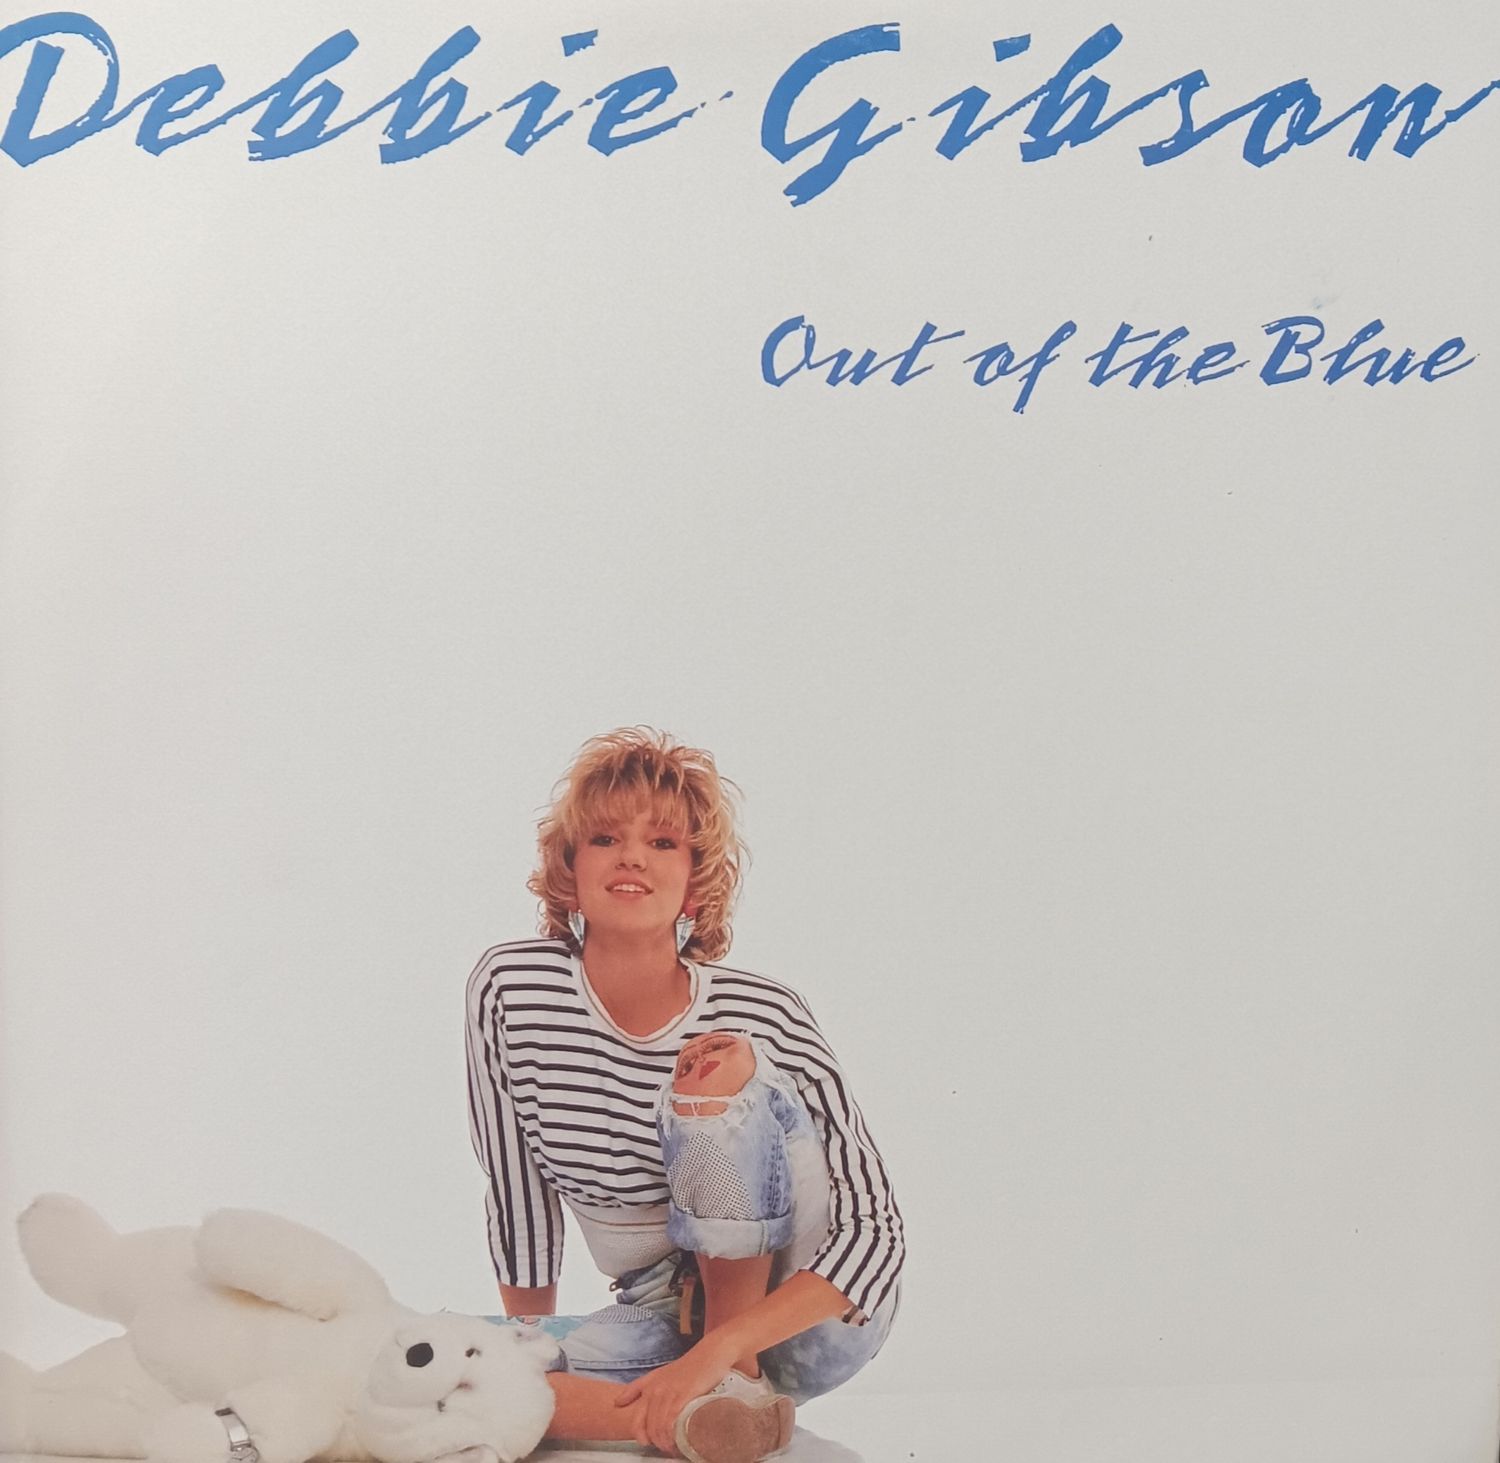 DEBBIE GIBSON - Out of the blue